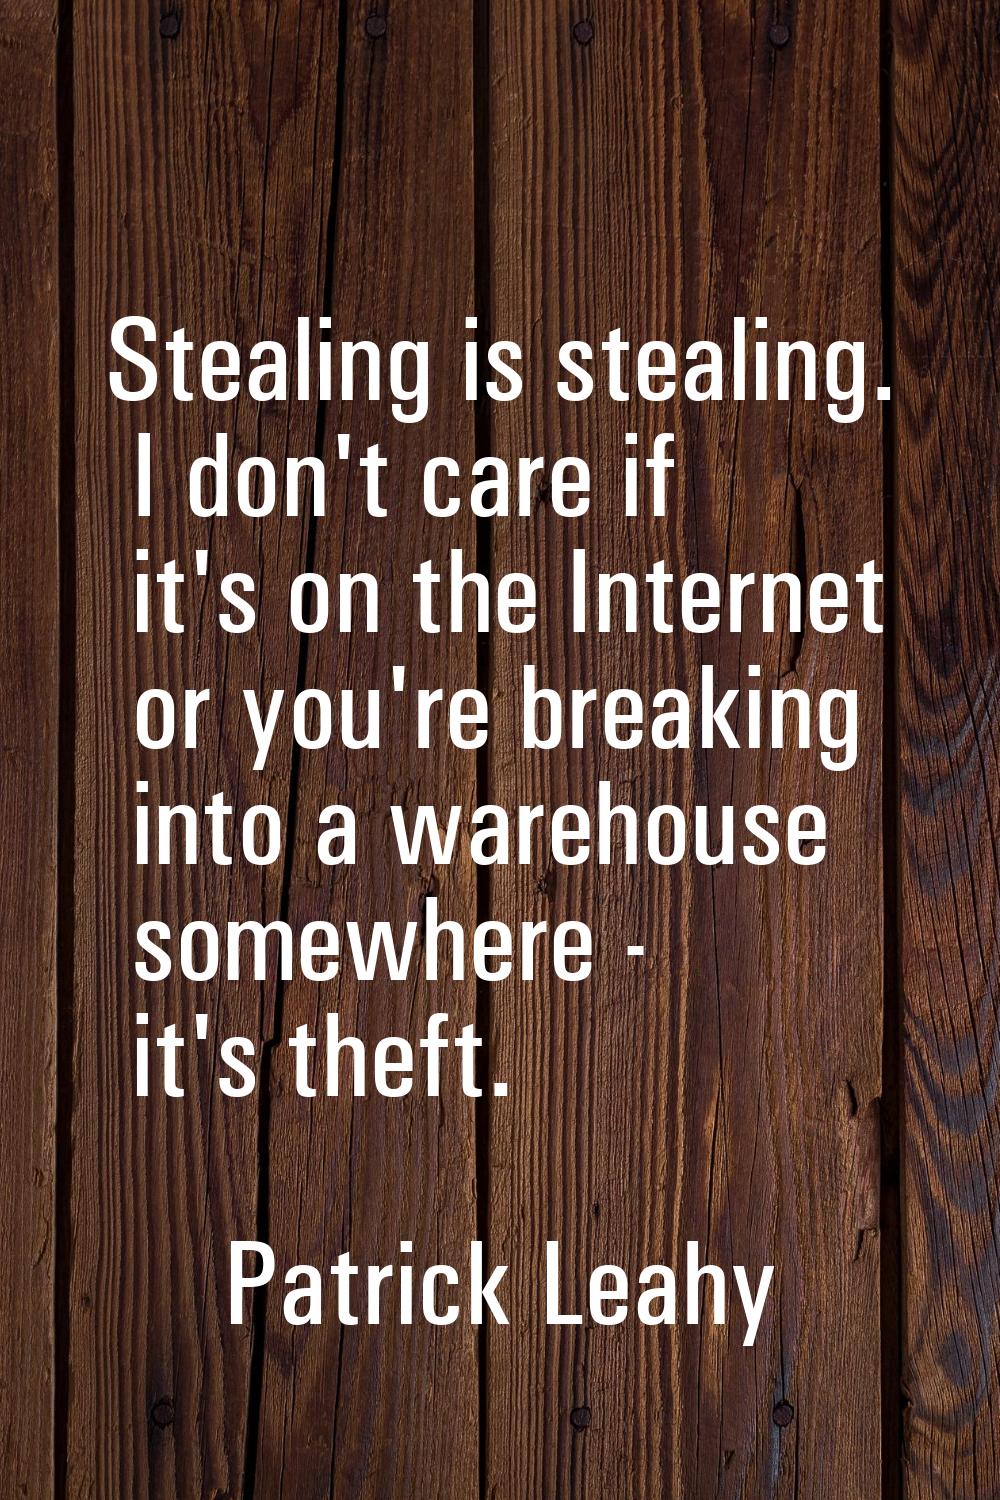 Stealing is stealing. I don't care if it's on the Internet or you're breaking into a warehouse some